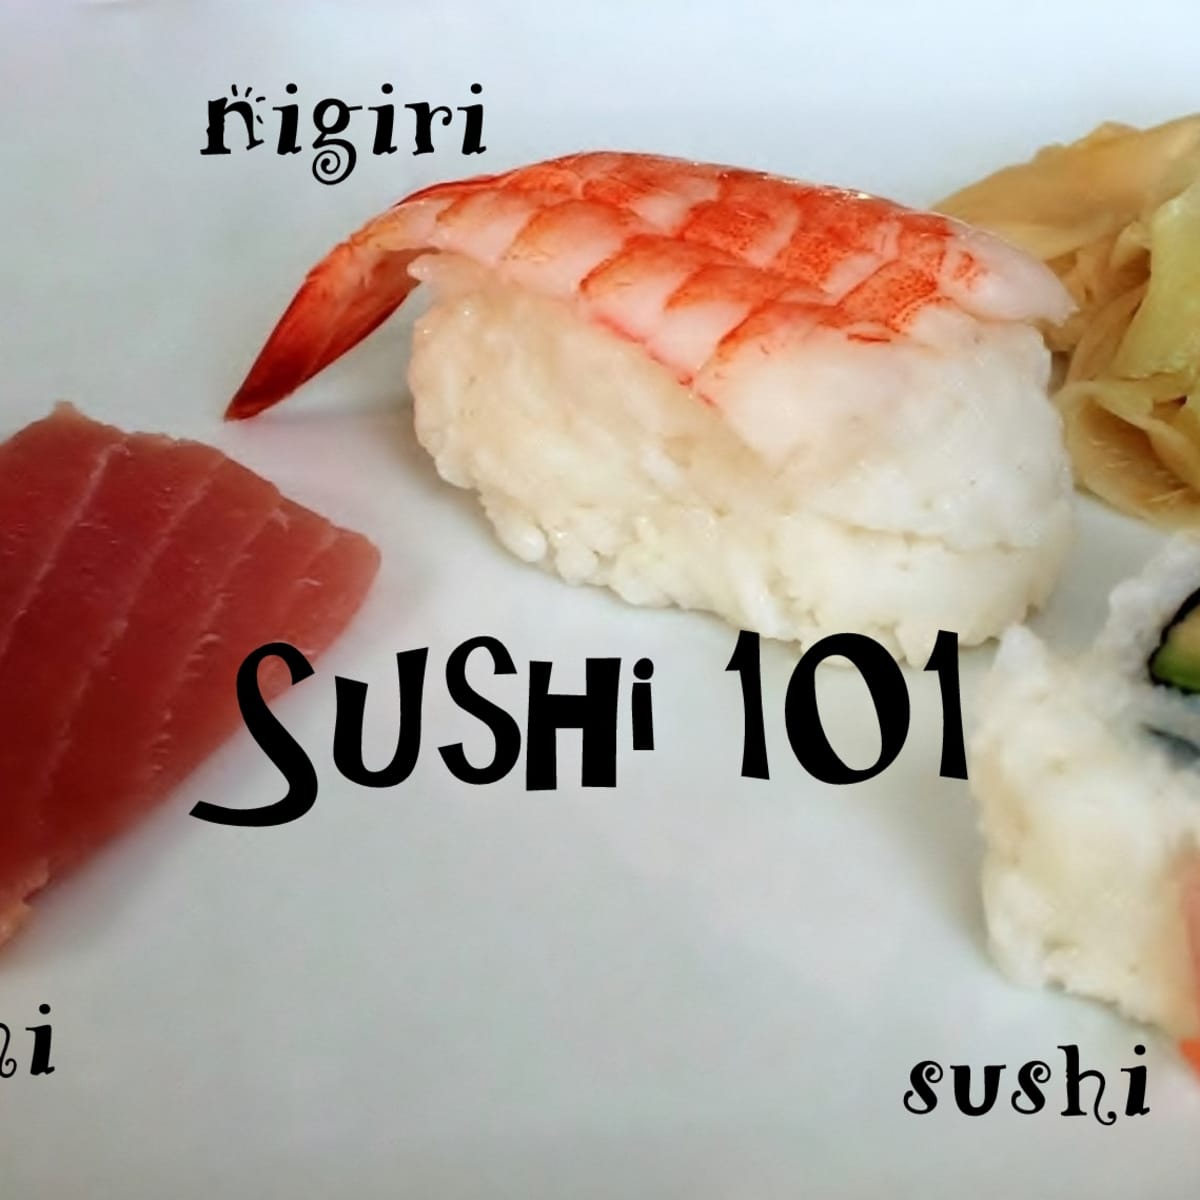 The Kinds of Sushi: Types, Names, and Photos -